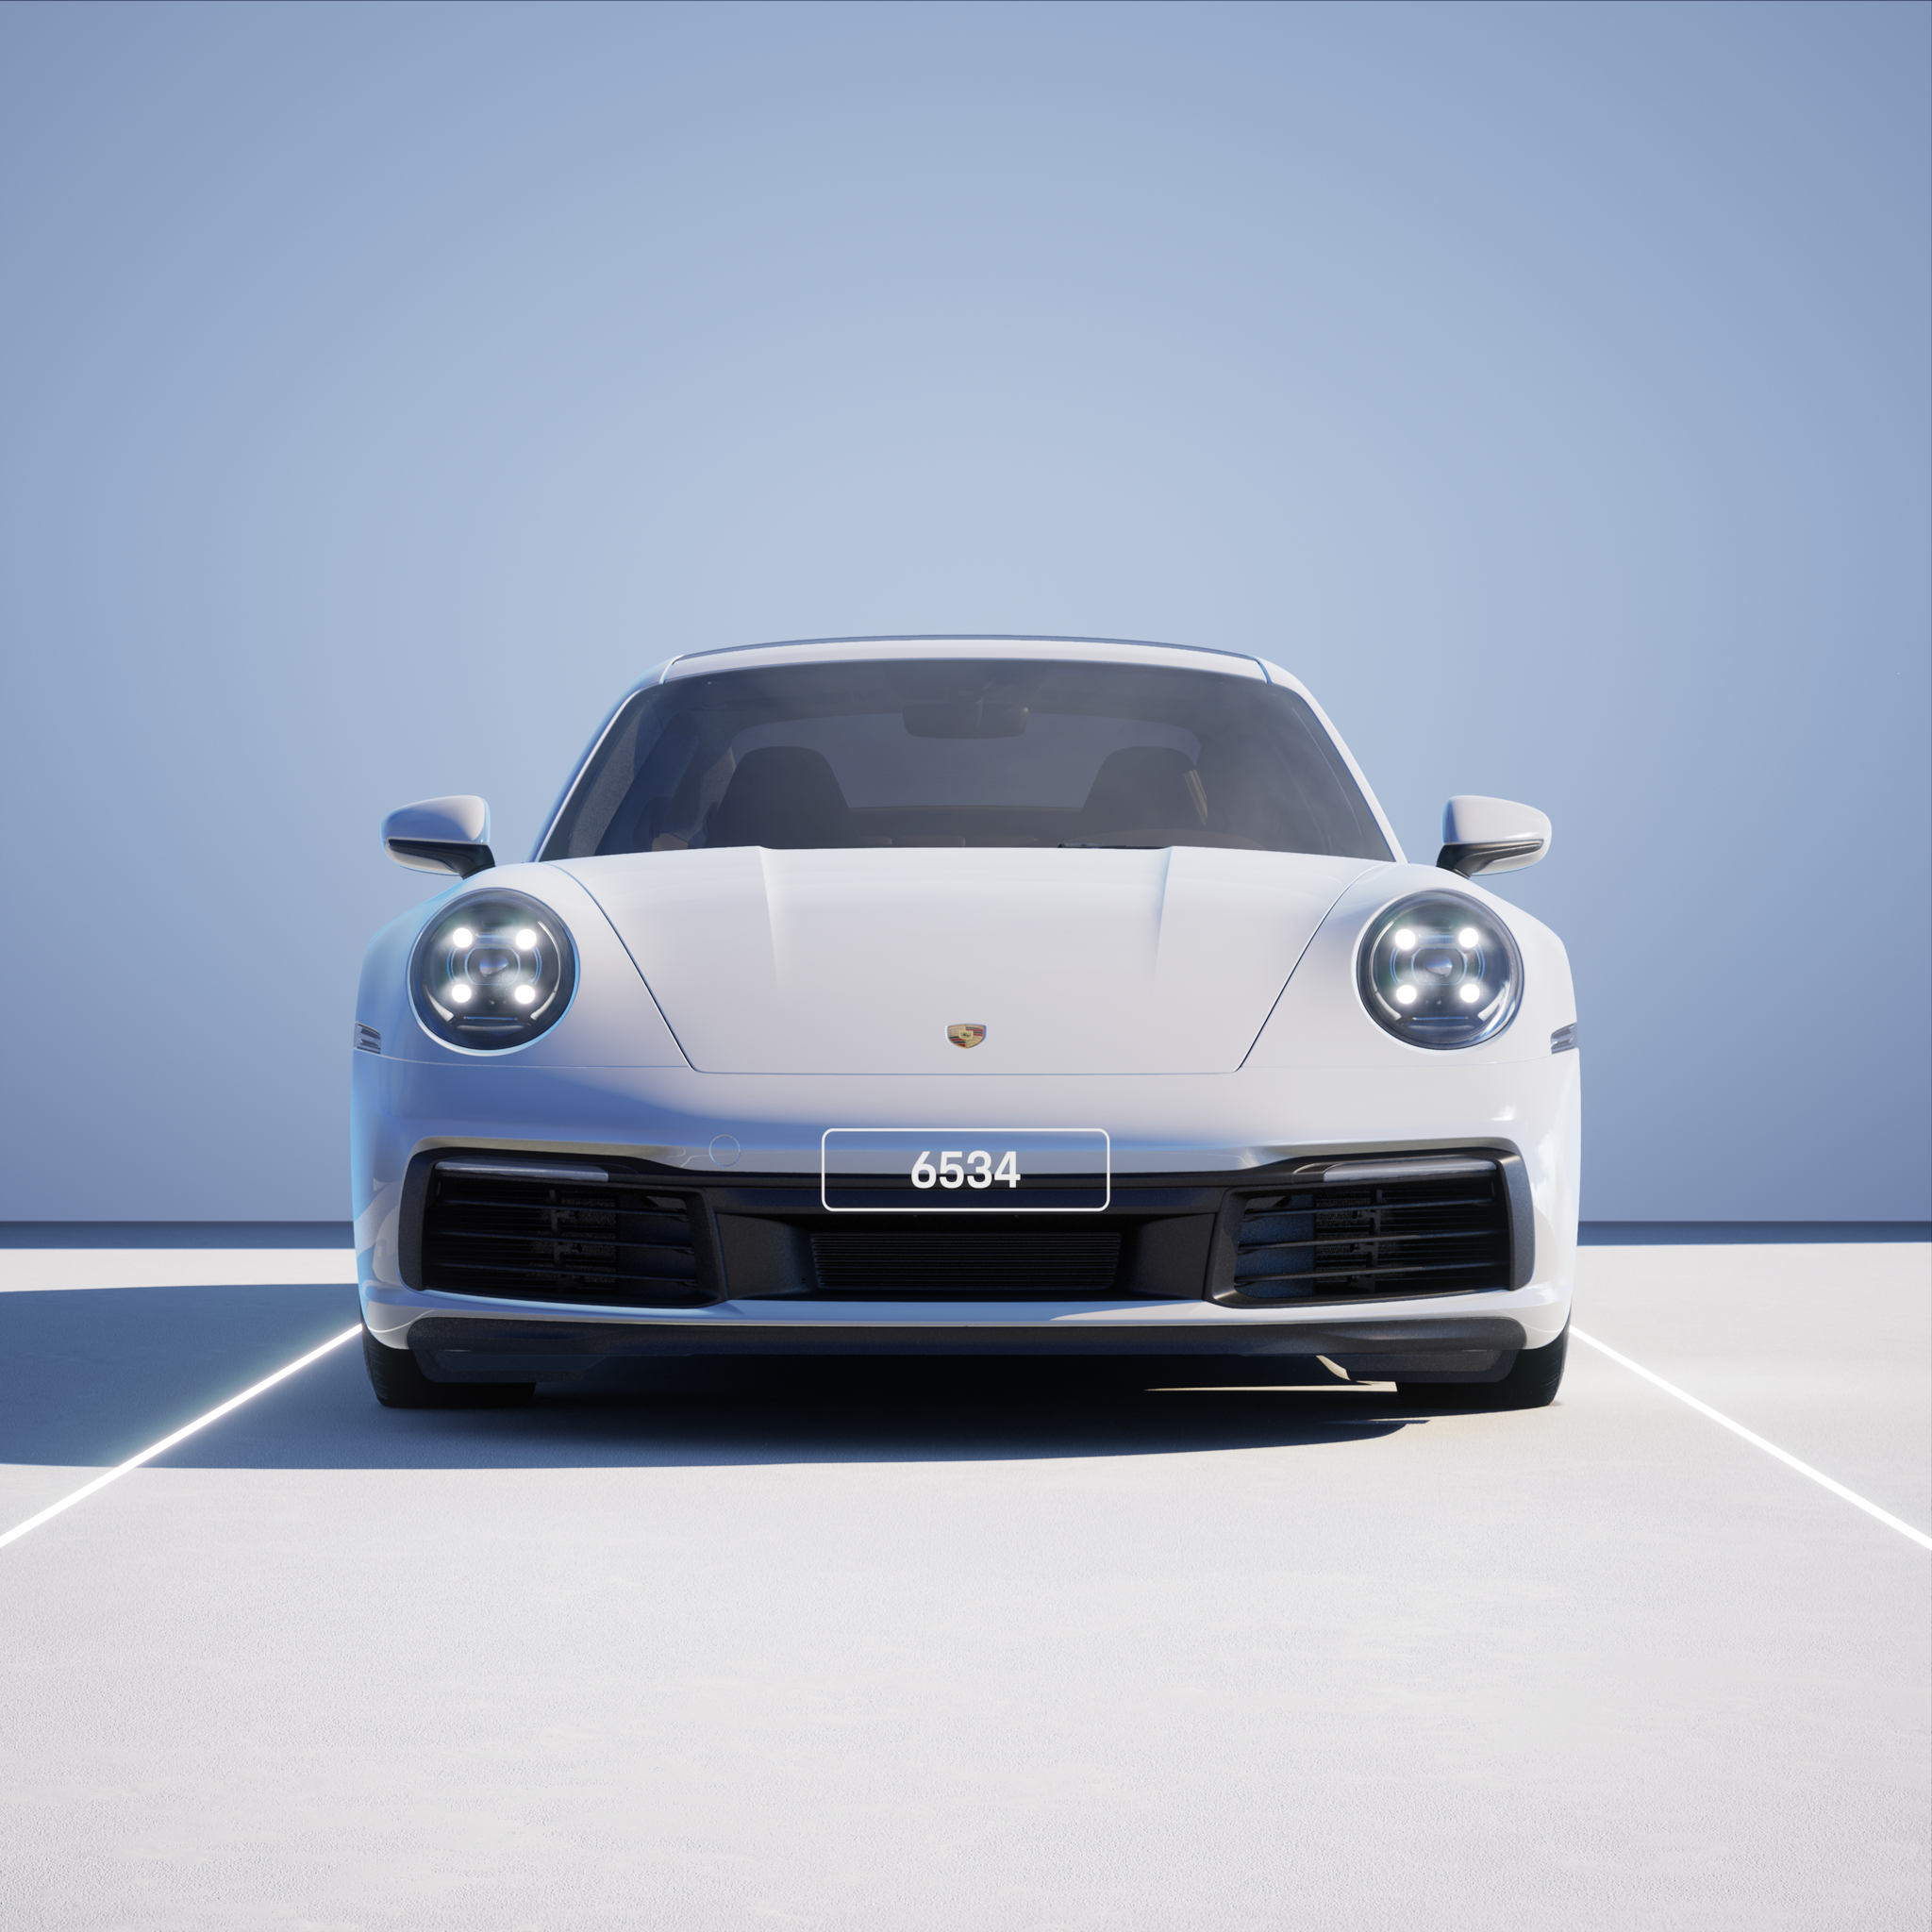 The PORSCHΞ 911 6534 image in phase